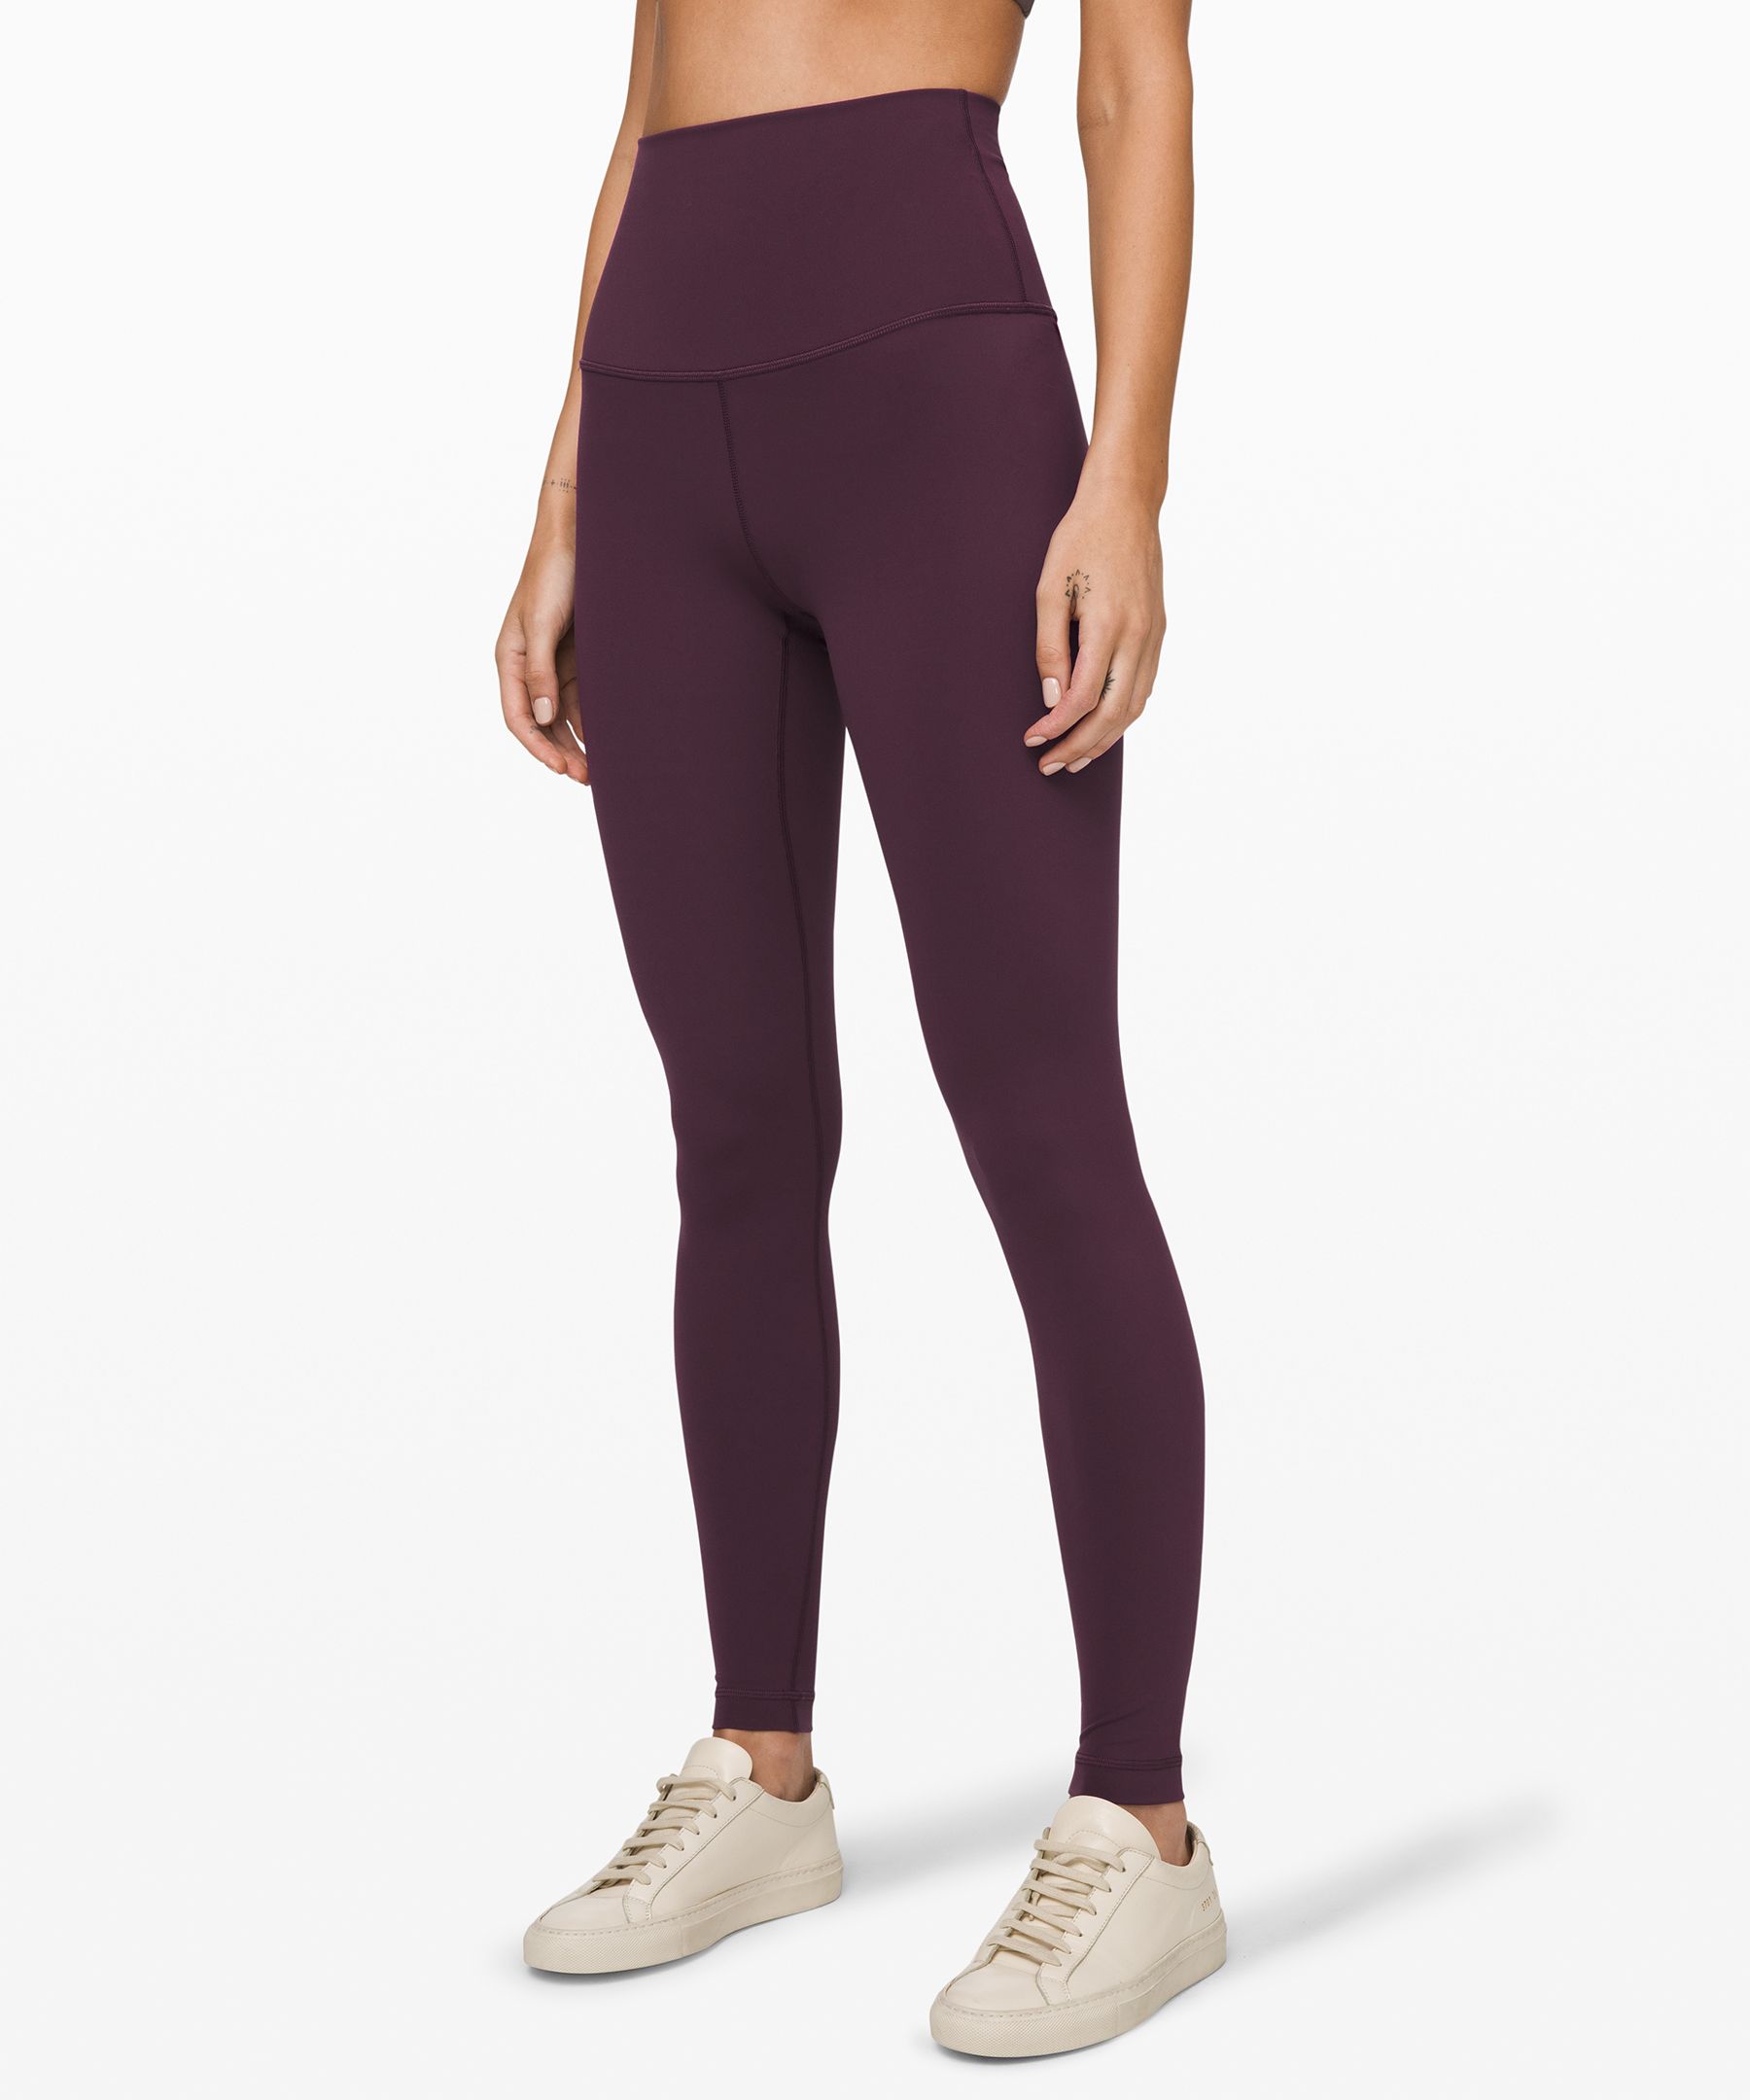 Lululemon Wunder Under Super High-rise Tight 28" *full-on Luxtreme Online Only In Arctic Plum